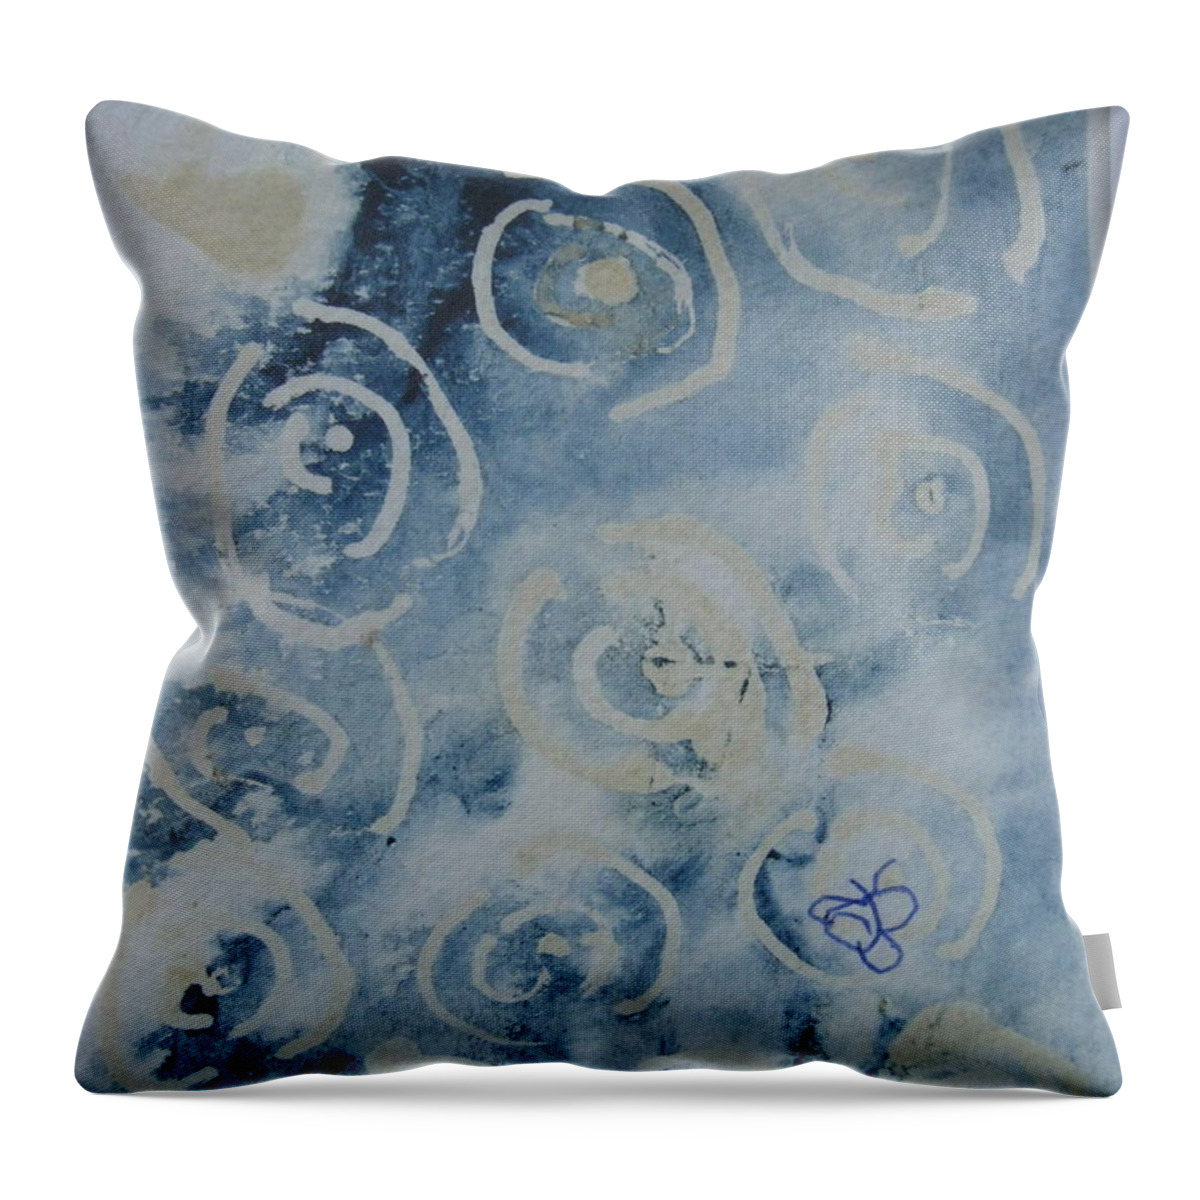 Blue Throw Pillow featuring the drawing Blue Spirals by AJ Brown